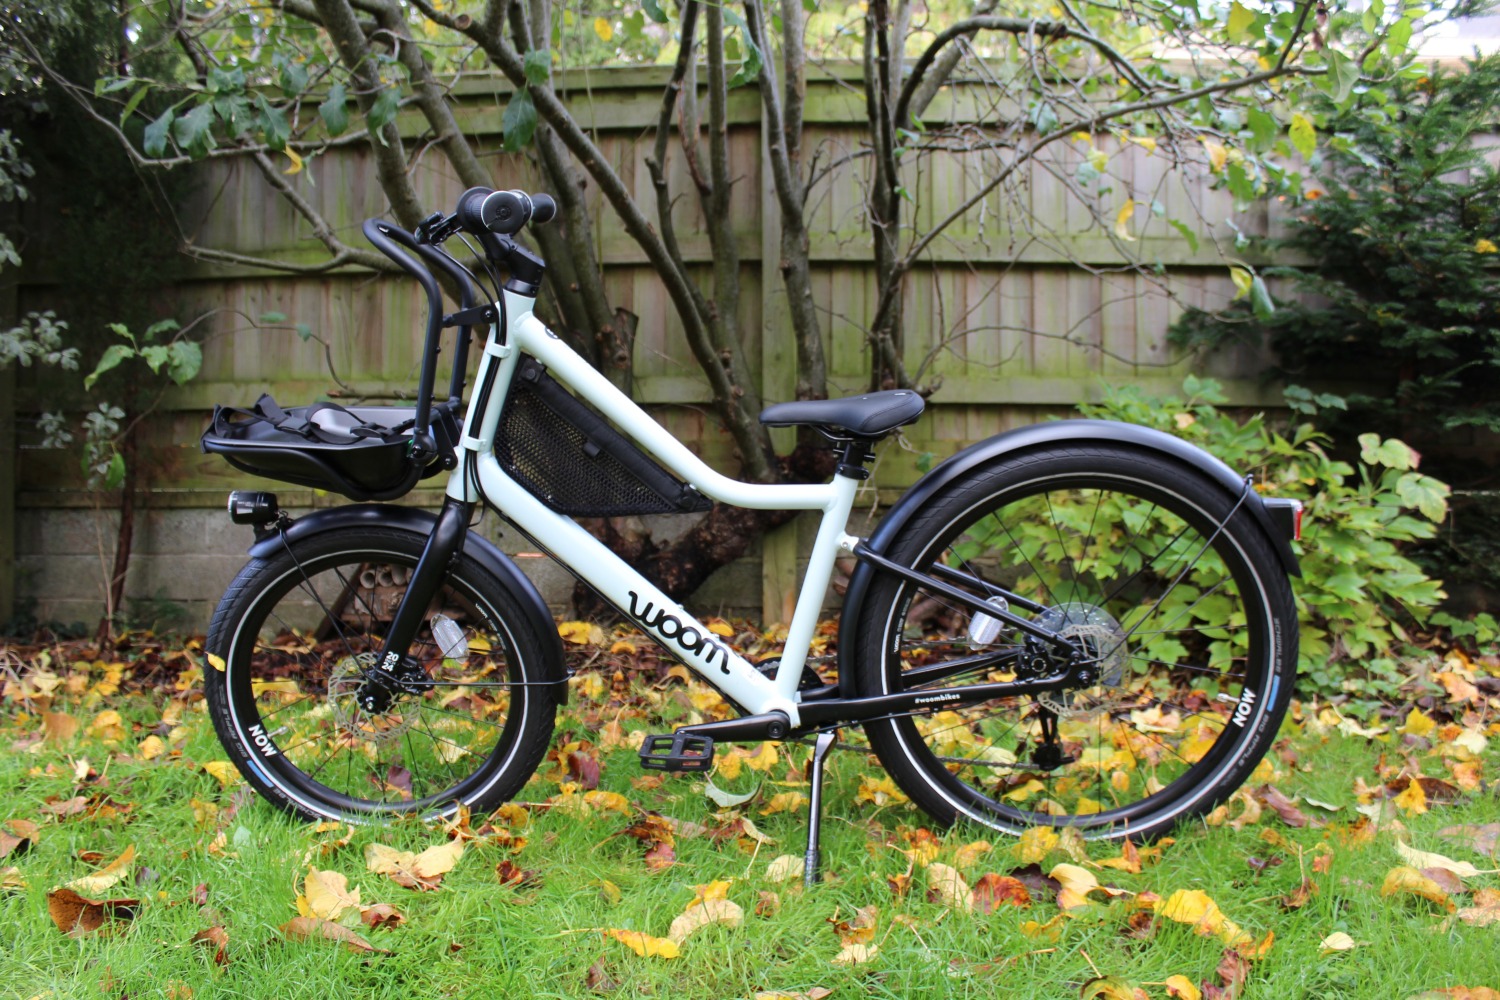 Woom NOW 5 kids urban bike - the review bike Cycle Sprog were sent to test side on on a patch of grass